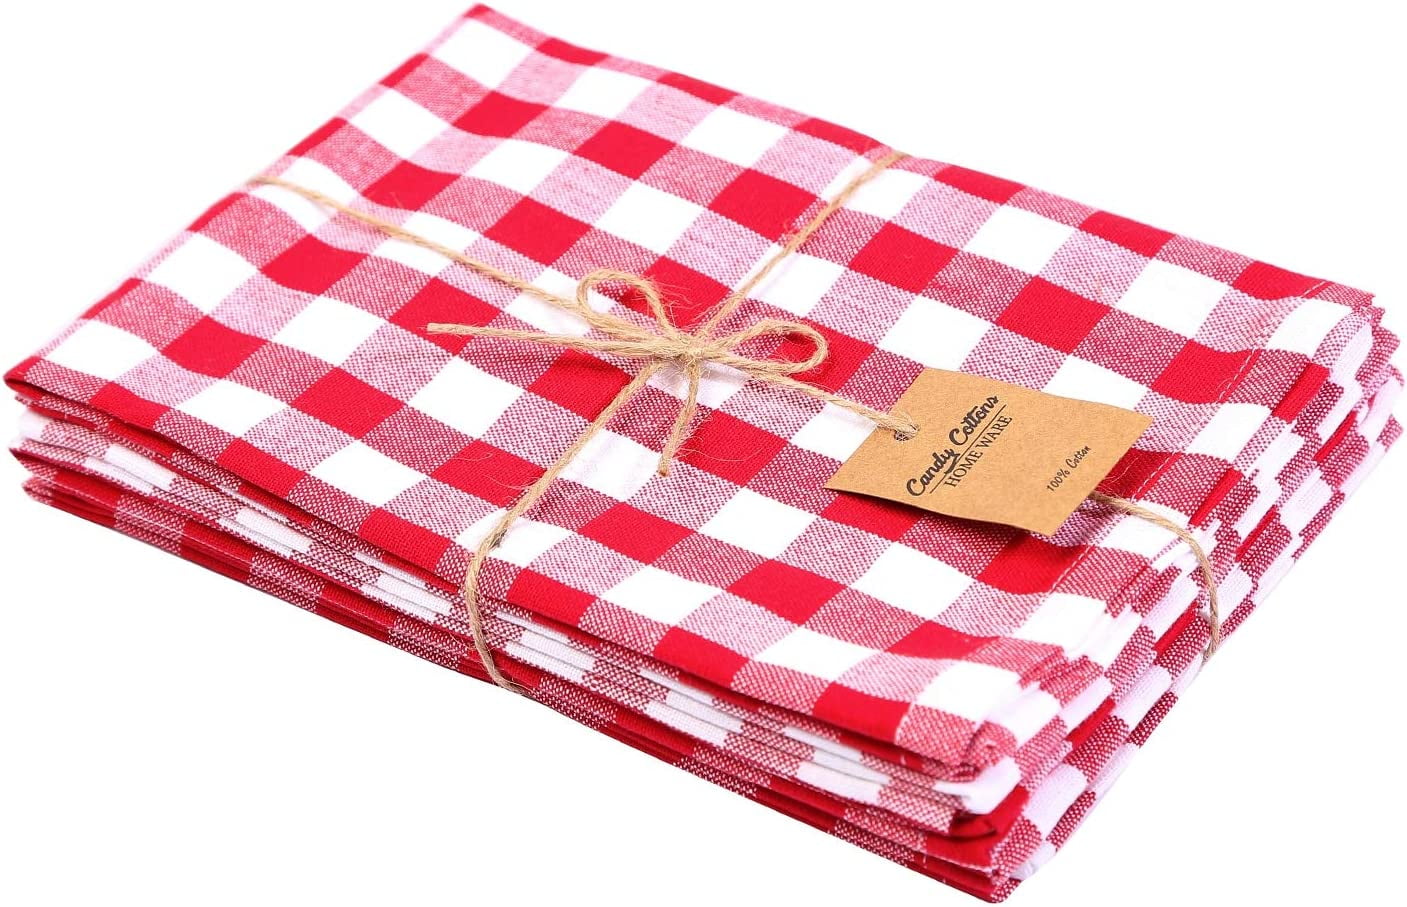 Cotton Craft Cloth Napkin - Set of 12-100% Cotton Twill Table Napkins - Lunch Dinner Napkin Halloween Harvest Fall Holiday Christmas Birthday Party